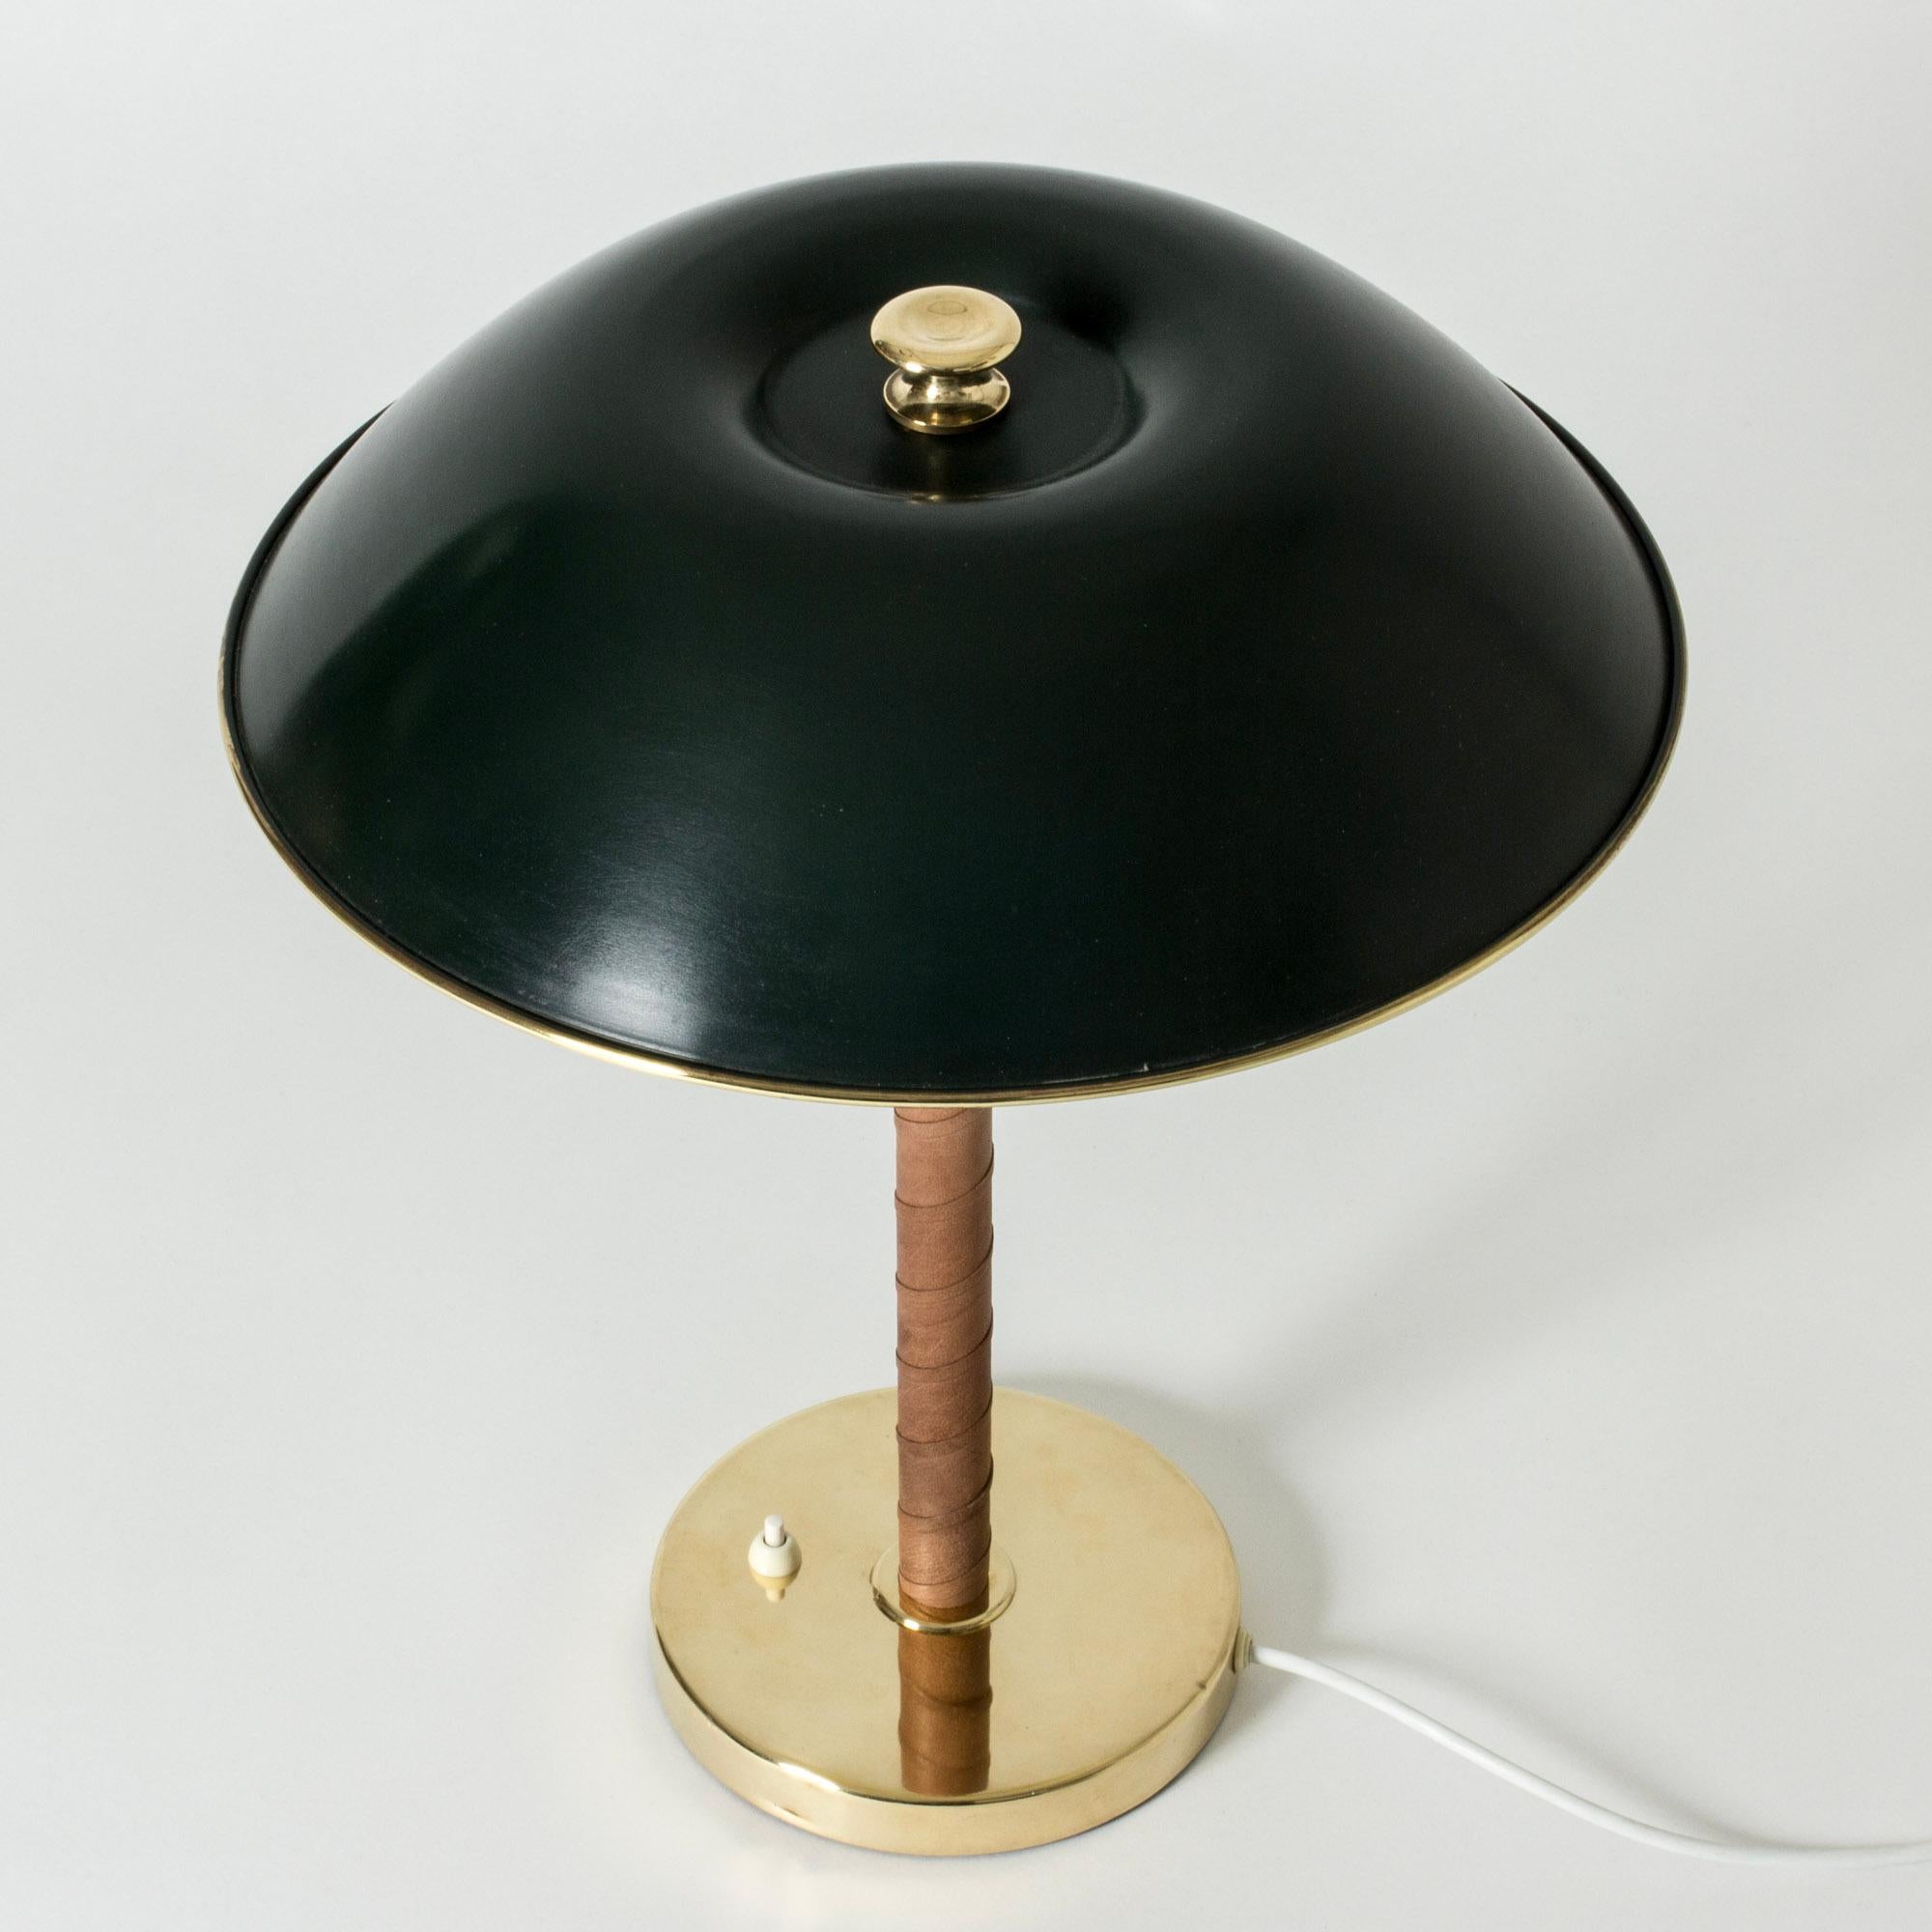 Elegant table lamp from Böhlmarks, with a brass base, leather wound handle and green lacquered metal shade adorned with a brass rim and knob.